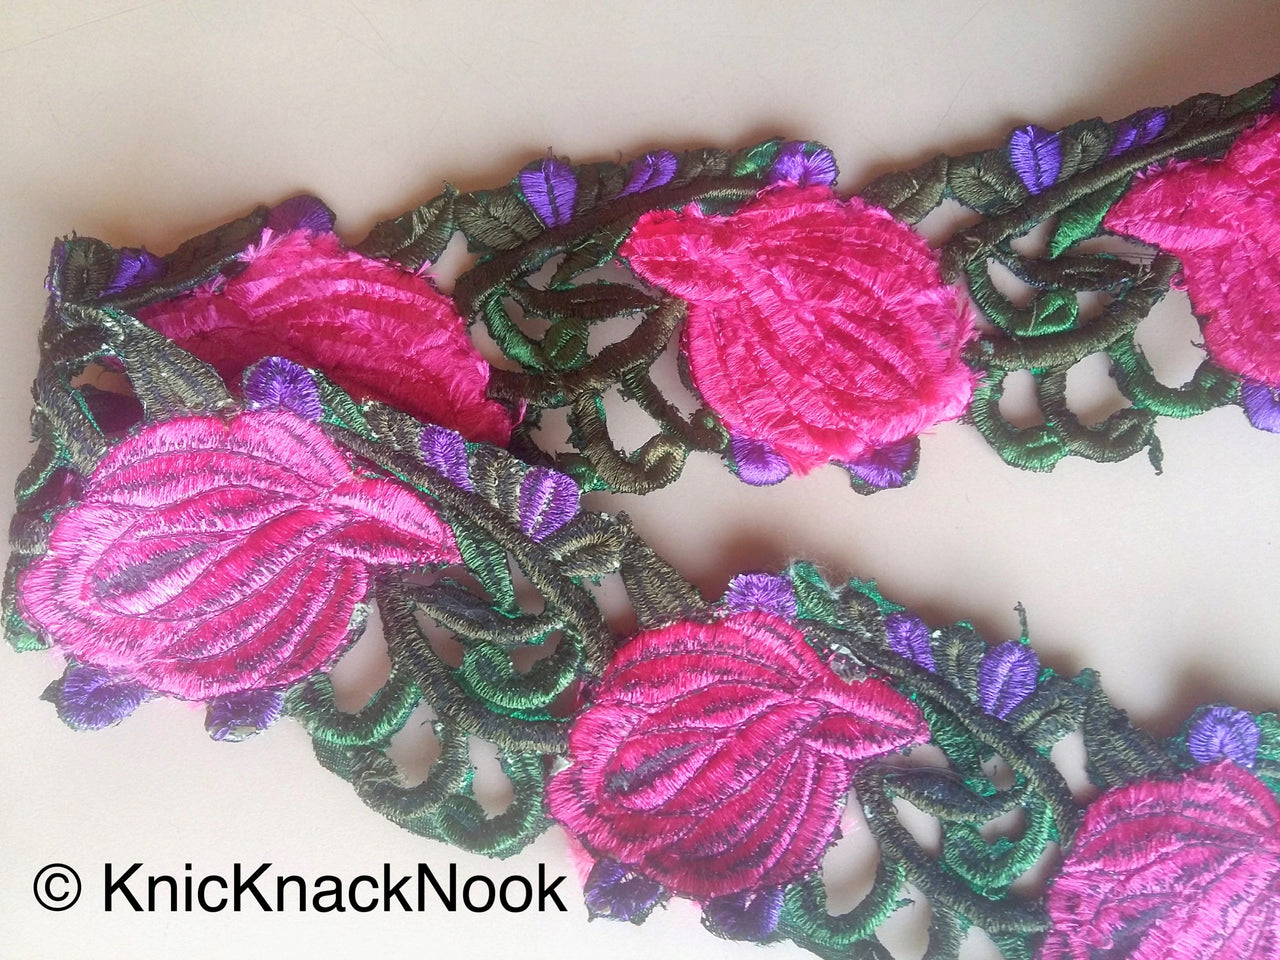 Fabric Cut Work Trim With Fuchsia Pink, Purple And Green Floral Embroidery, 72mm wide - 200317L267